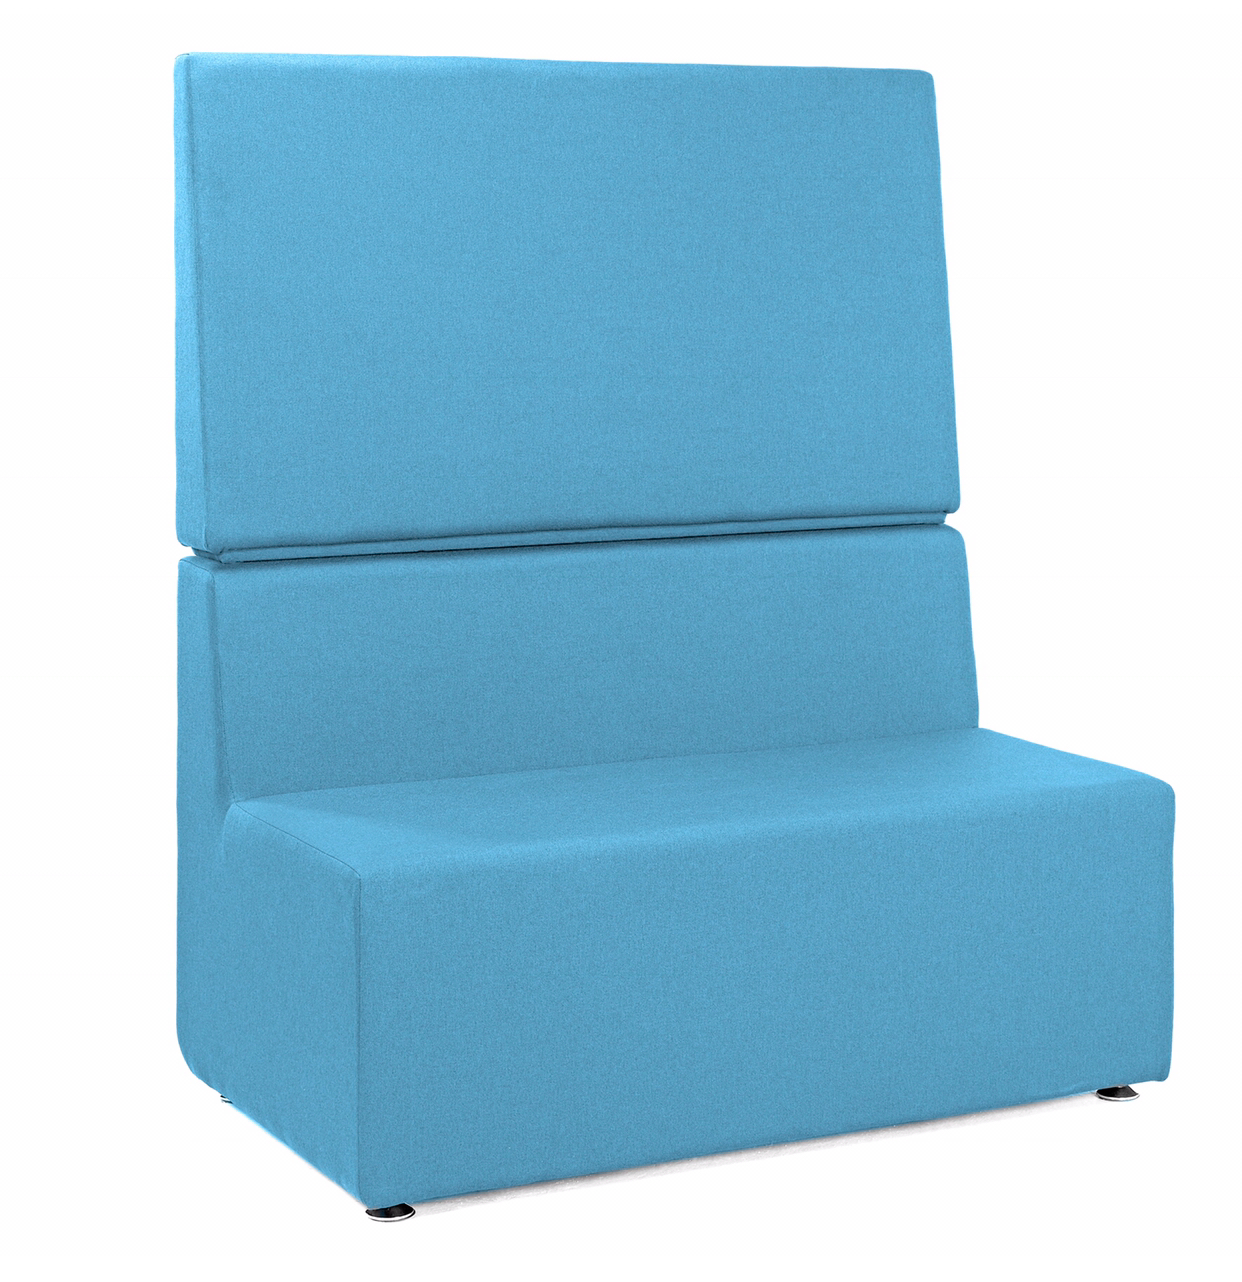 Special Booth single seater Medium back 1110 h x  800 w x 730 d